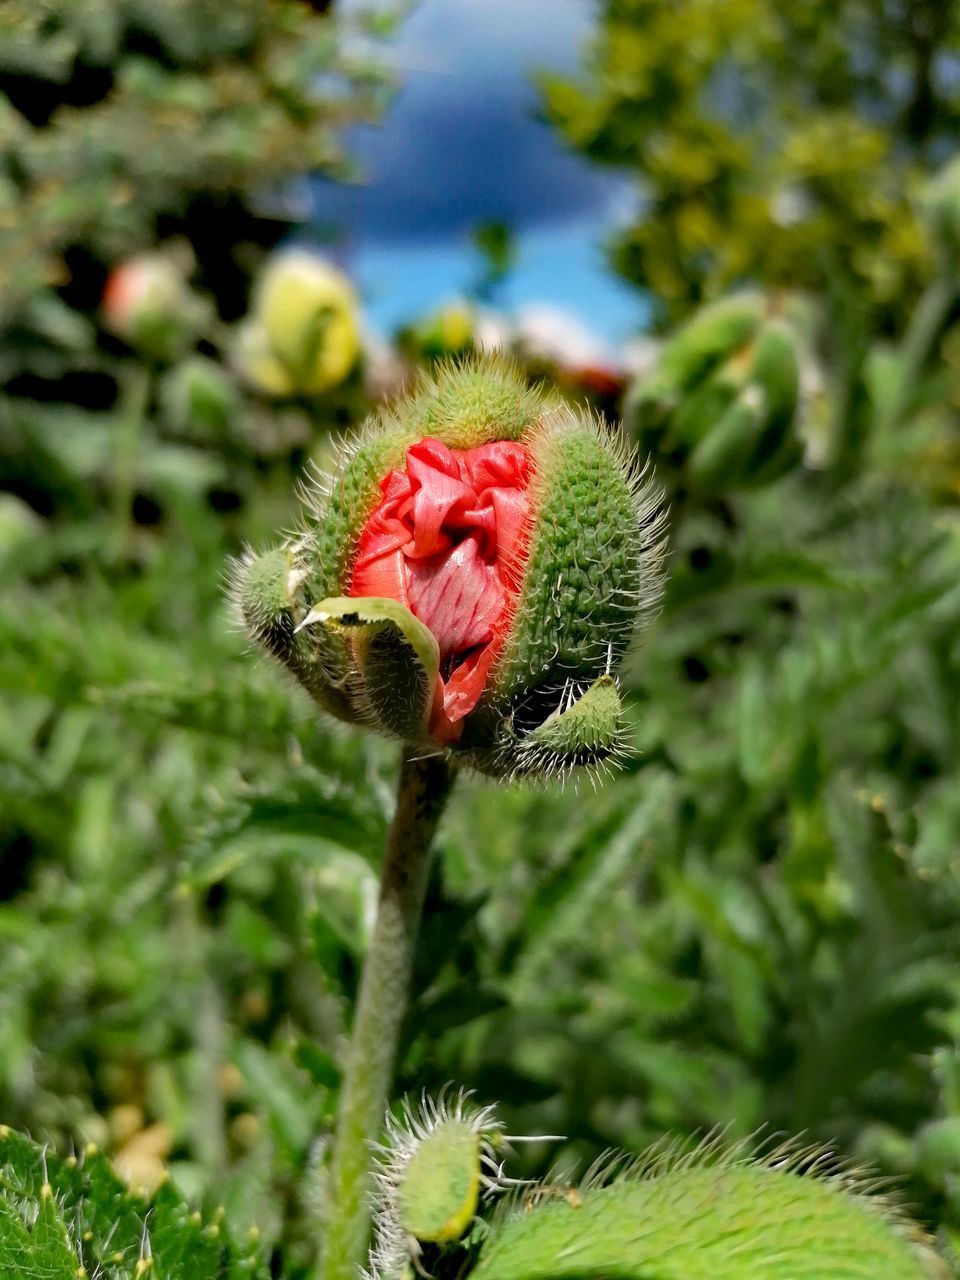 CLOSE-UP OF RED FLOWER ON GREEN PLANT